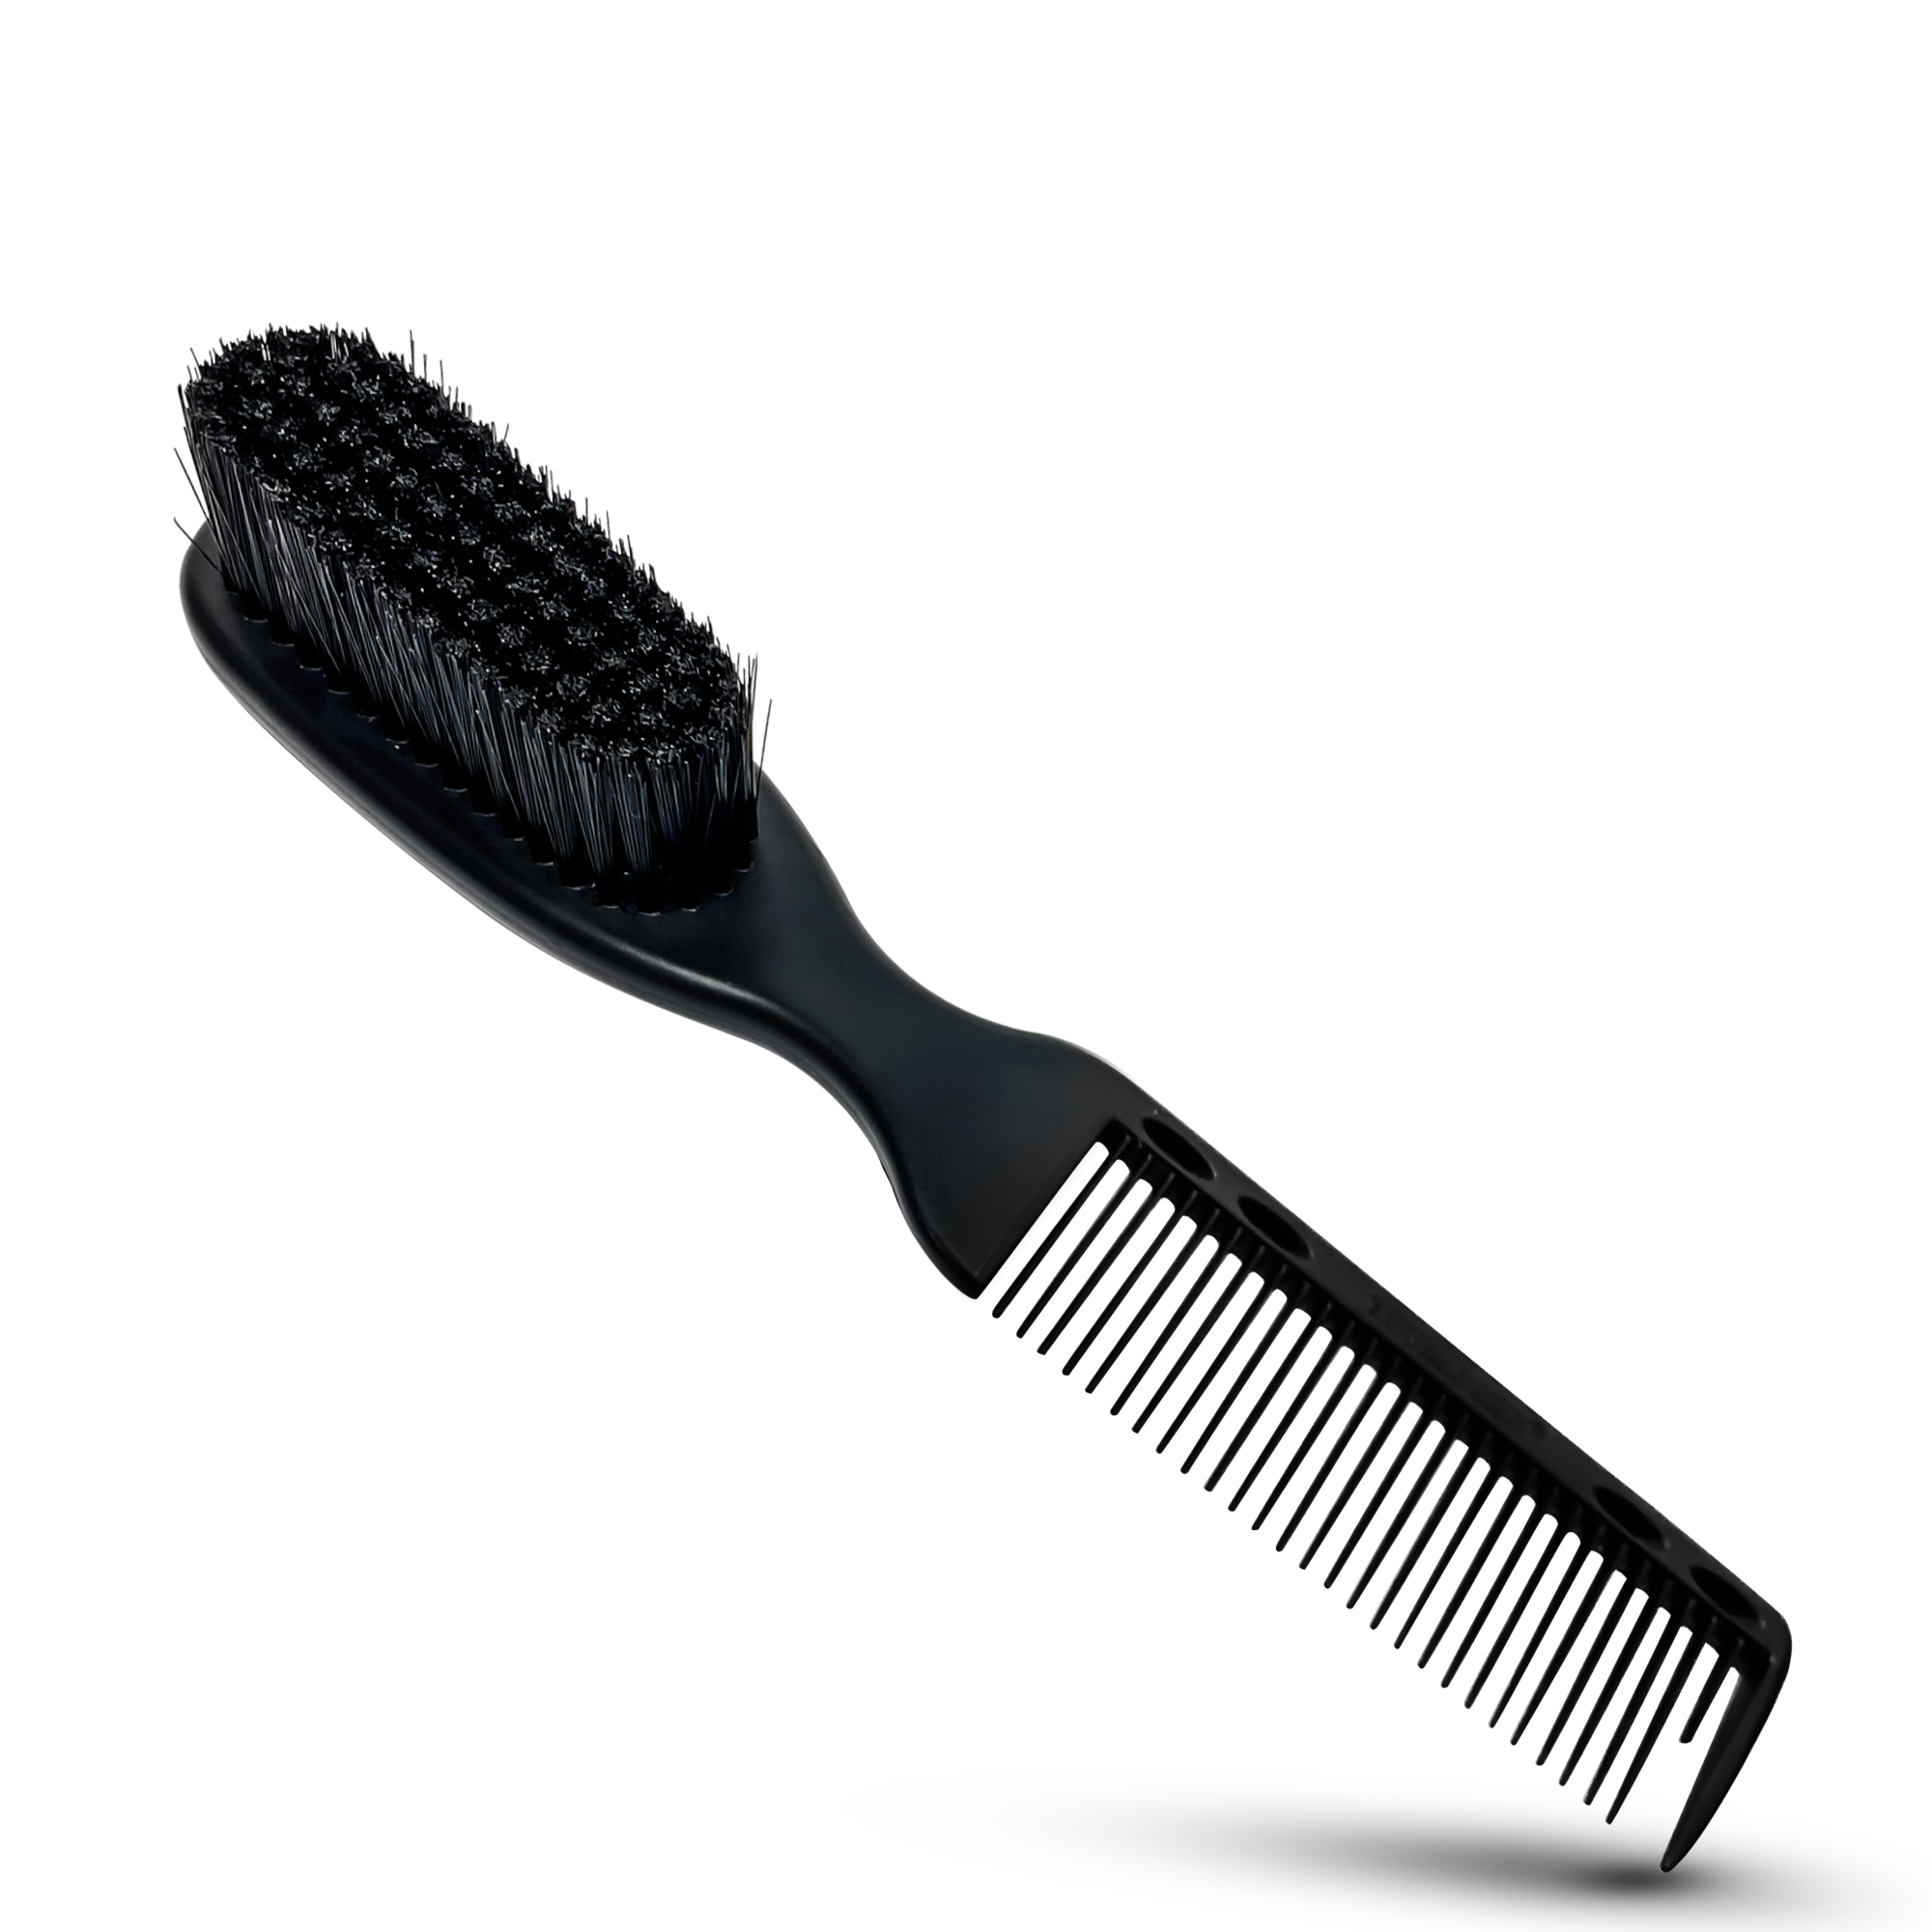 Tru Barber’s Innovative Brush Is Here To Revolutionize The Beauty Industry